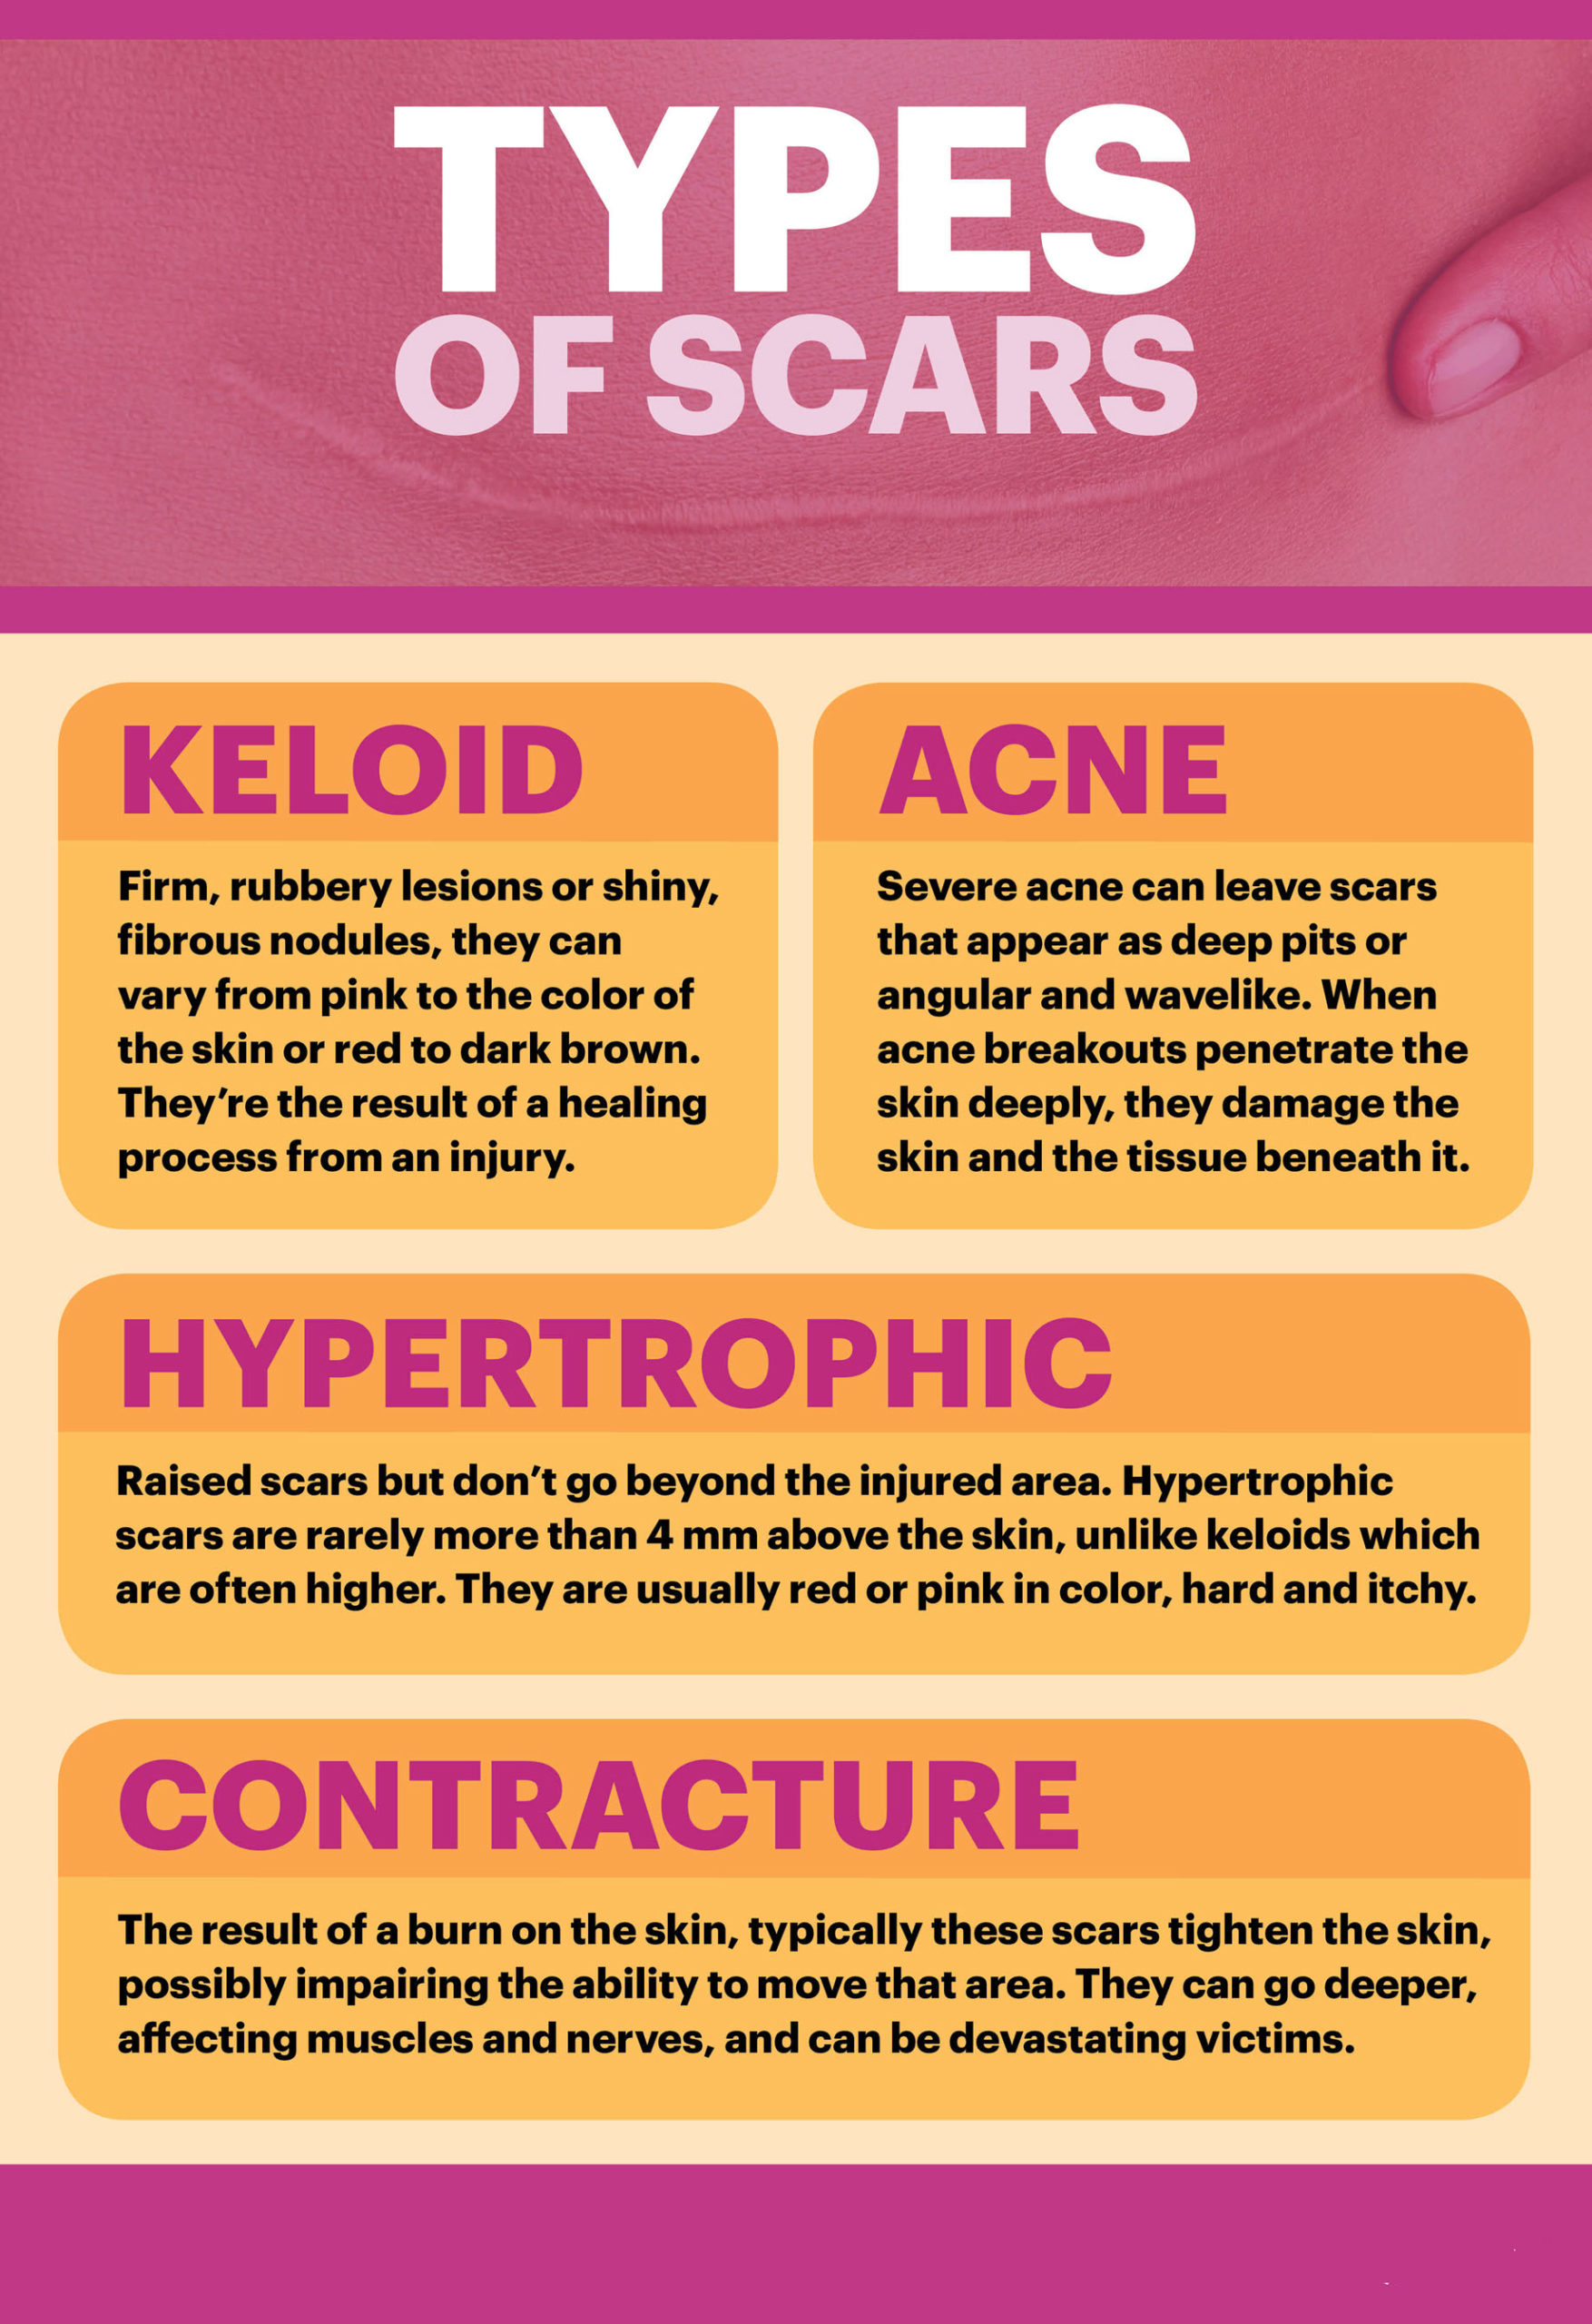 Types of scars - Mkexpress.net